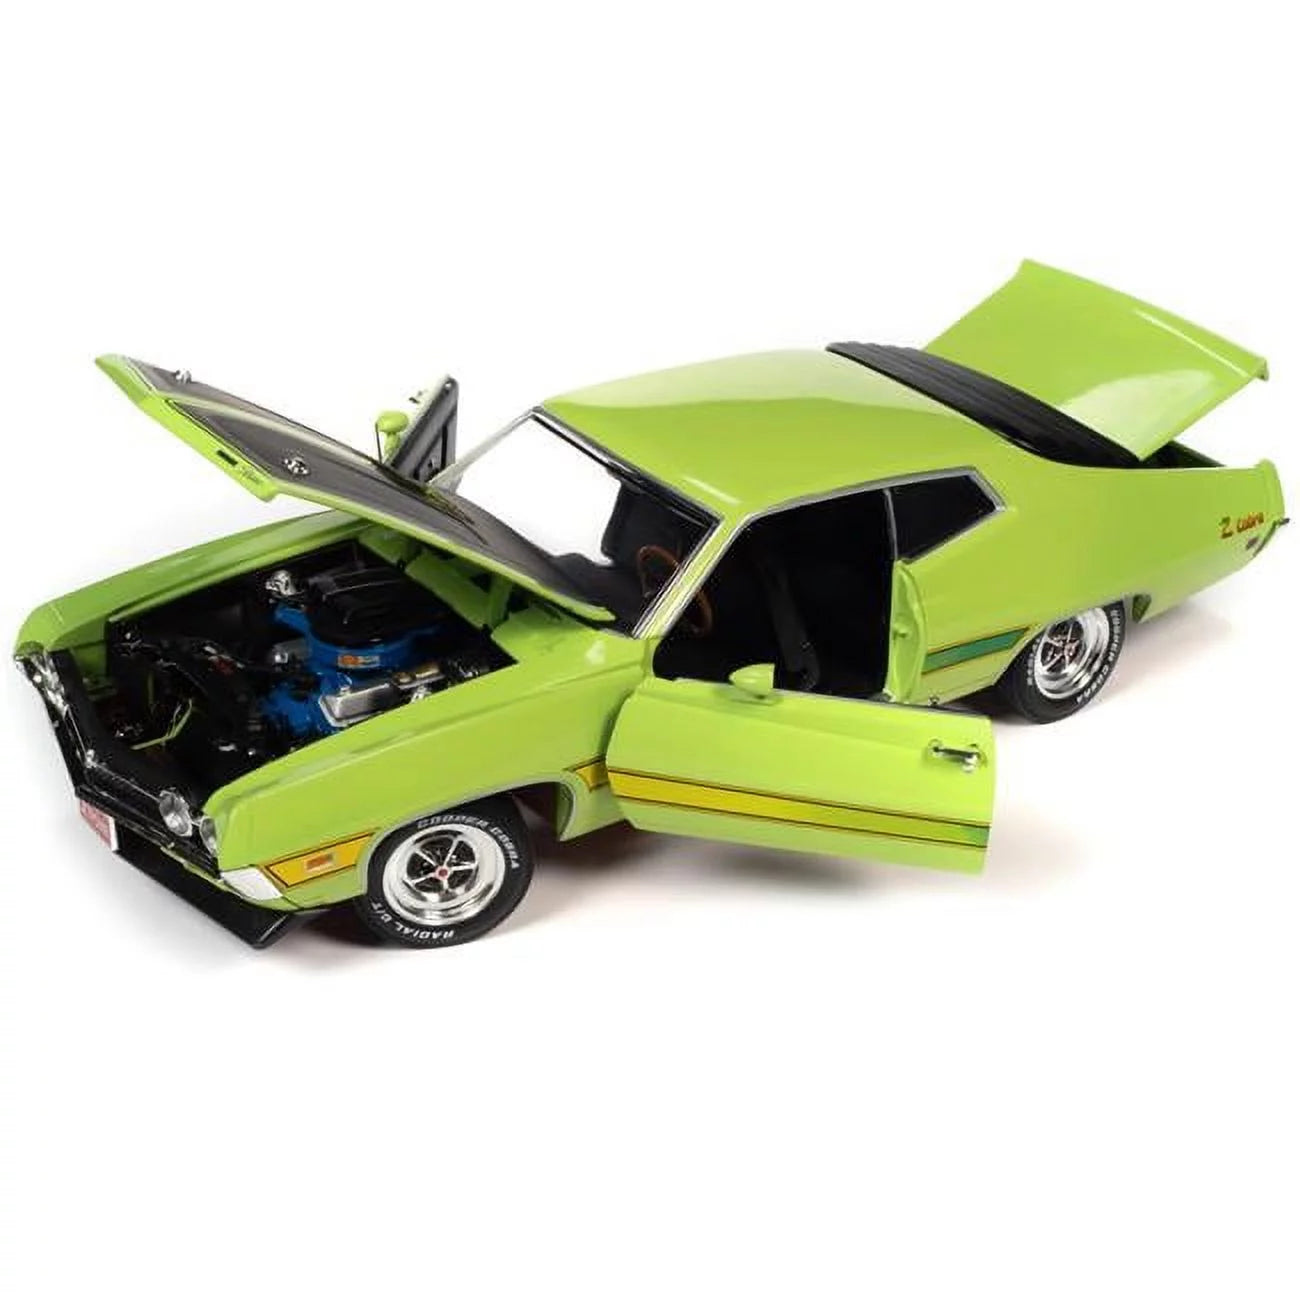 1971 Ford Torino Cobra Grabber Lime Green with Matt Black Hood and Stripes "Class of 1971" 1/18 Diecast Model Car by Auto World